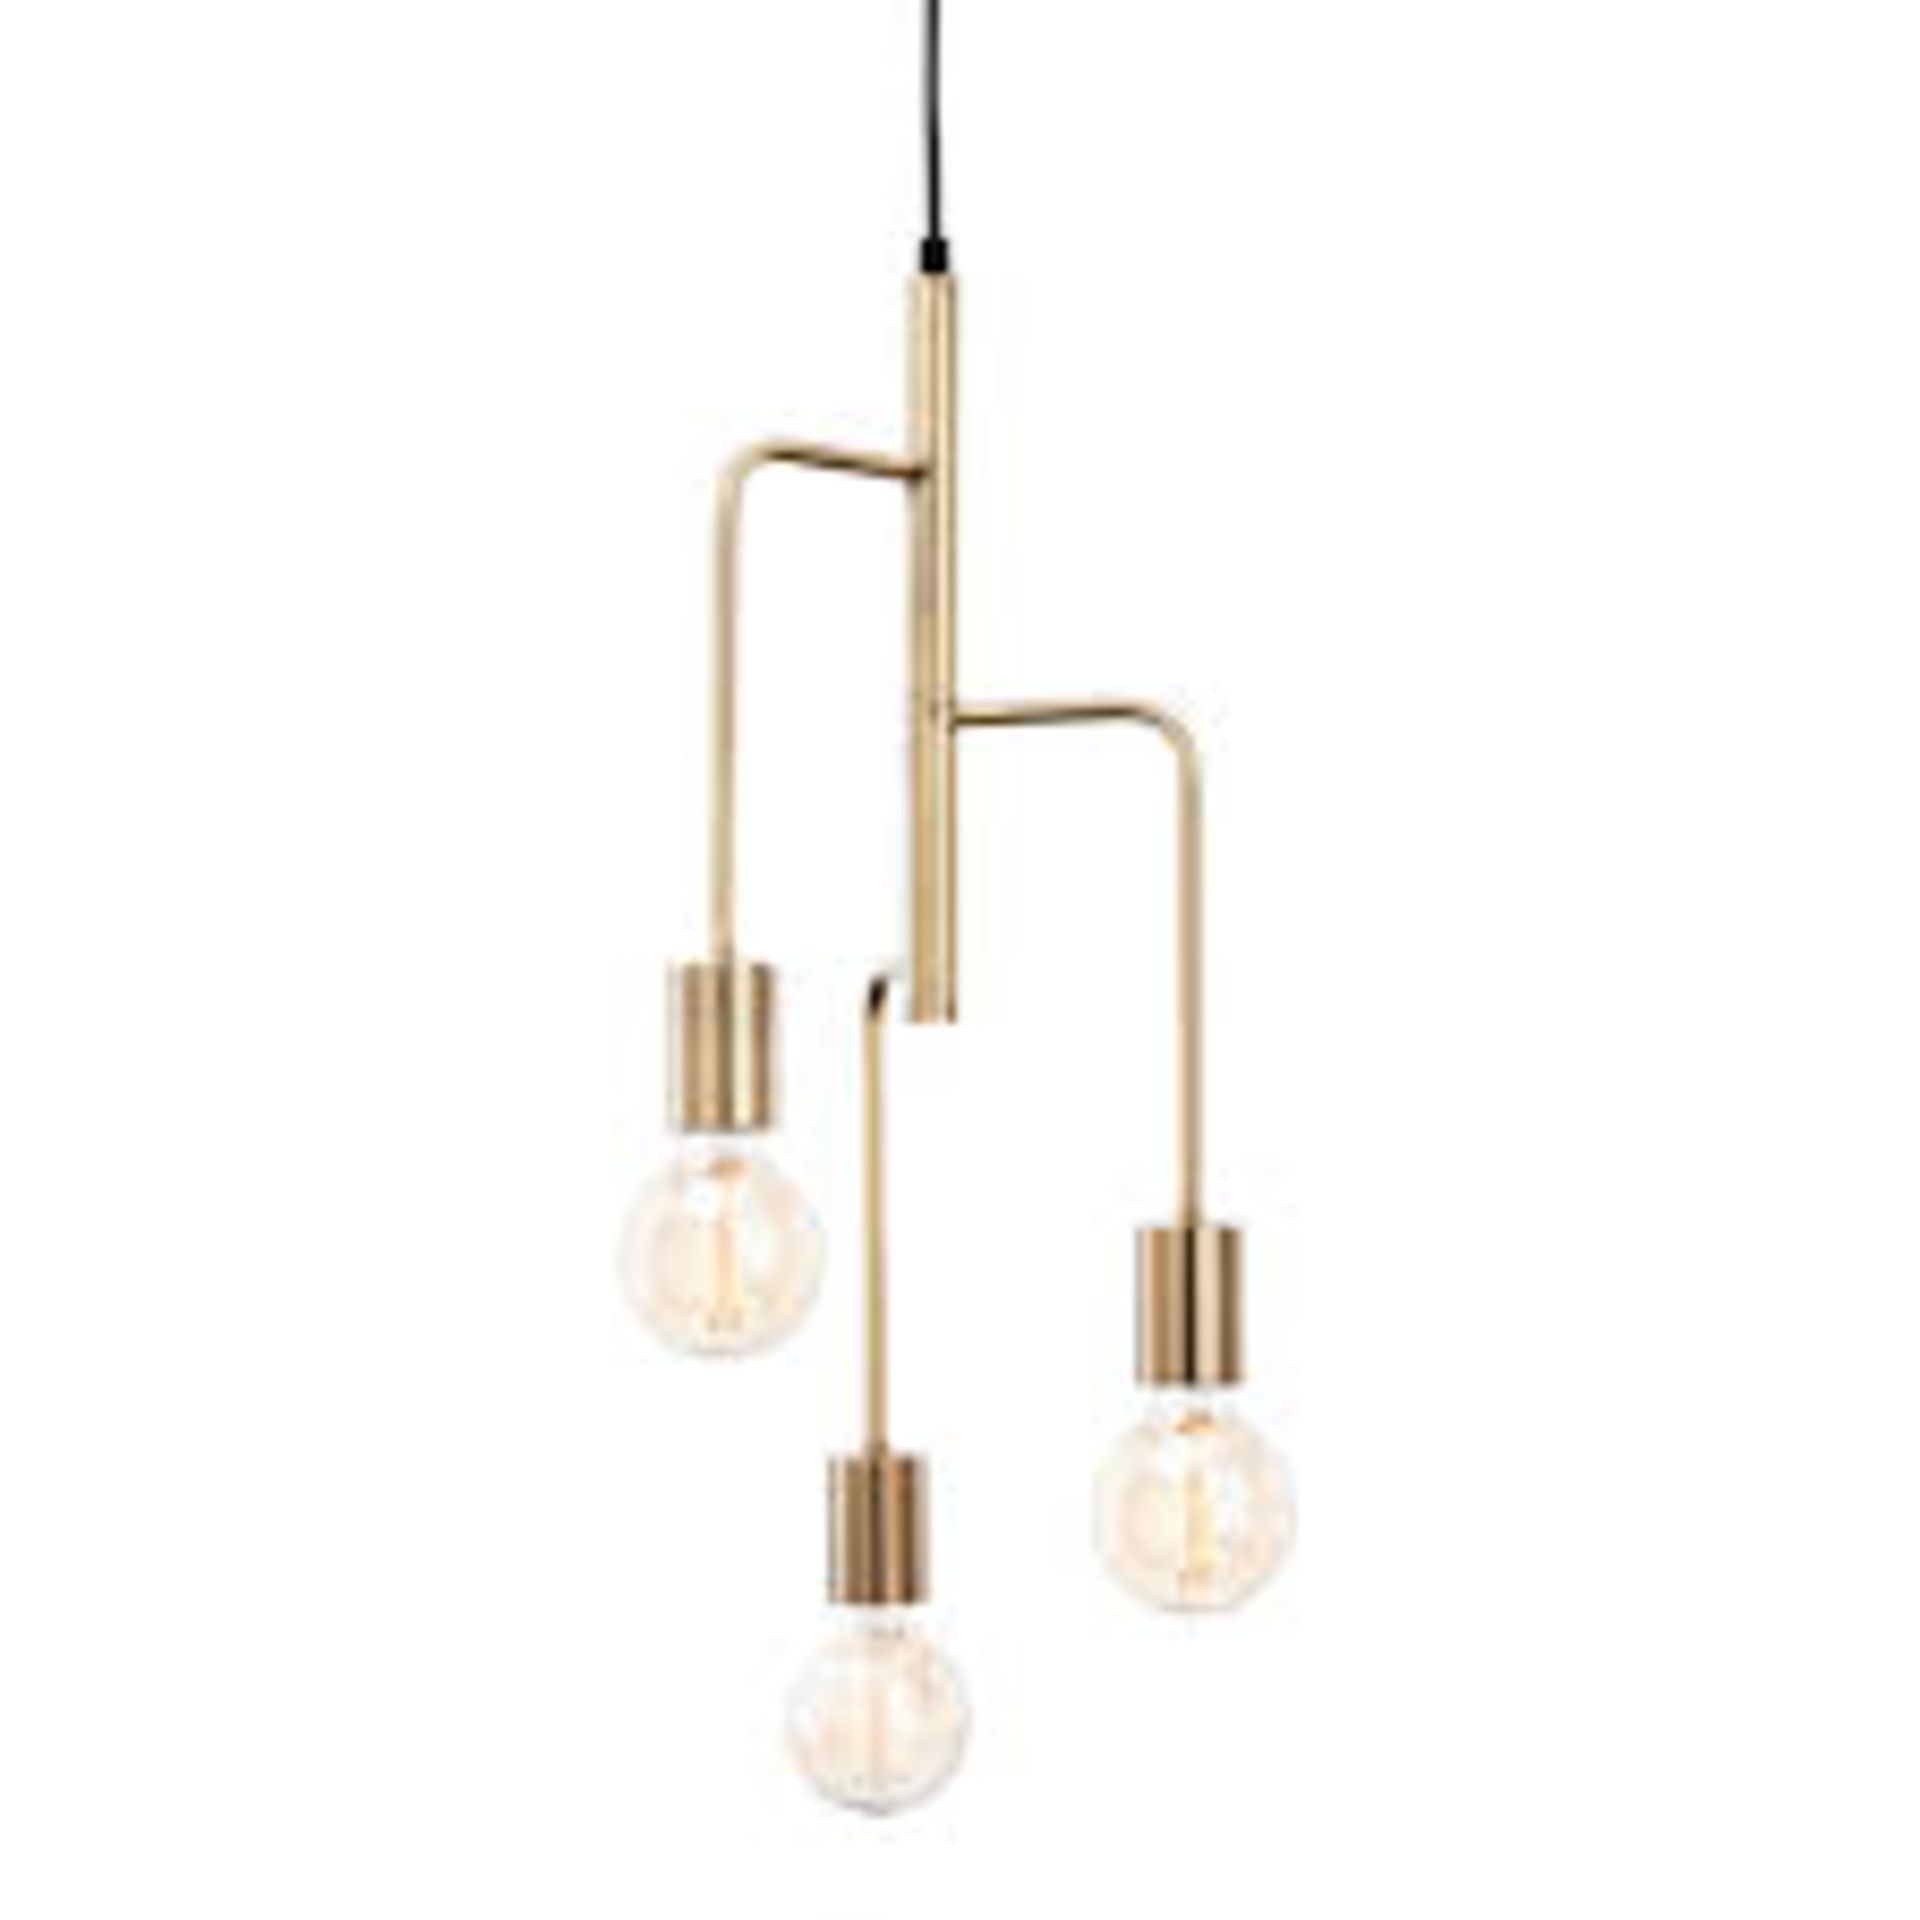 Boxed Roxy Antique Brass Ceiling Pendant RRP £75 (11058) (Public Viewing and Appraisals Available)